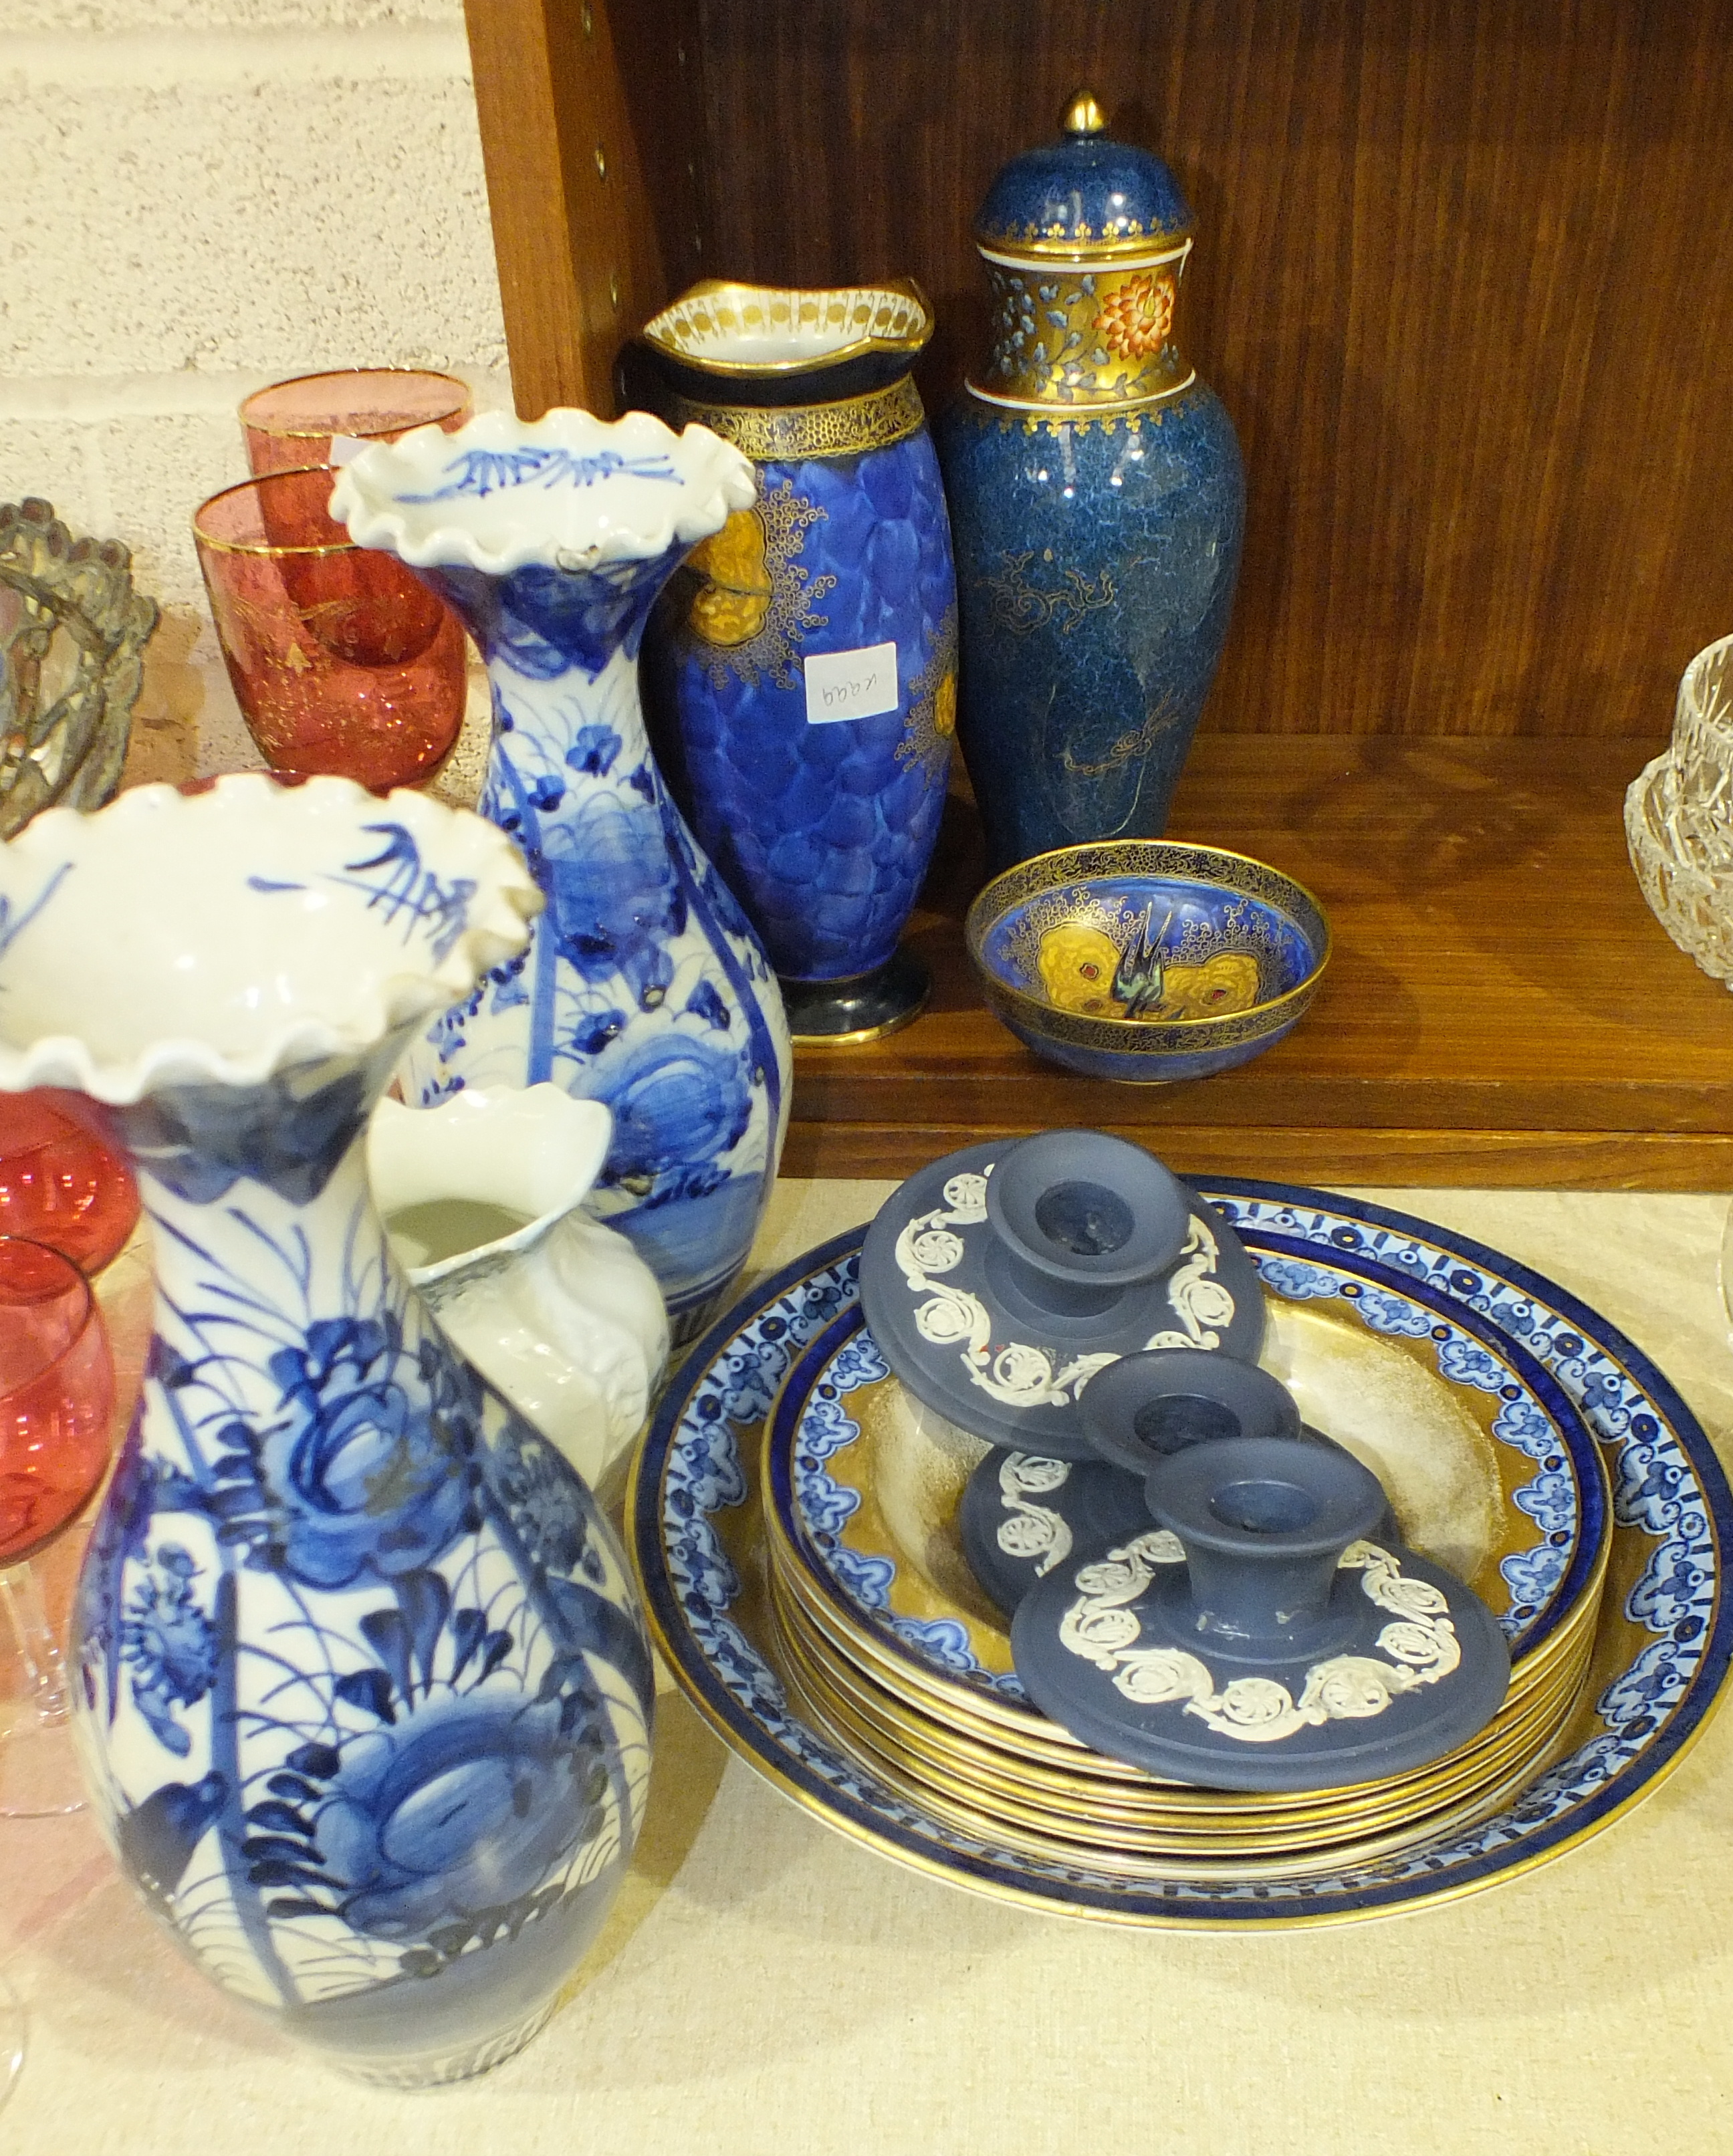 Two Chinese baluster blue and white ceramic vases, three Wedgwood jasperware candle holders and